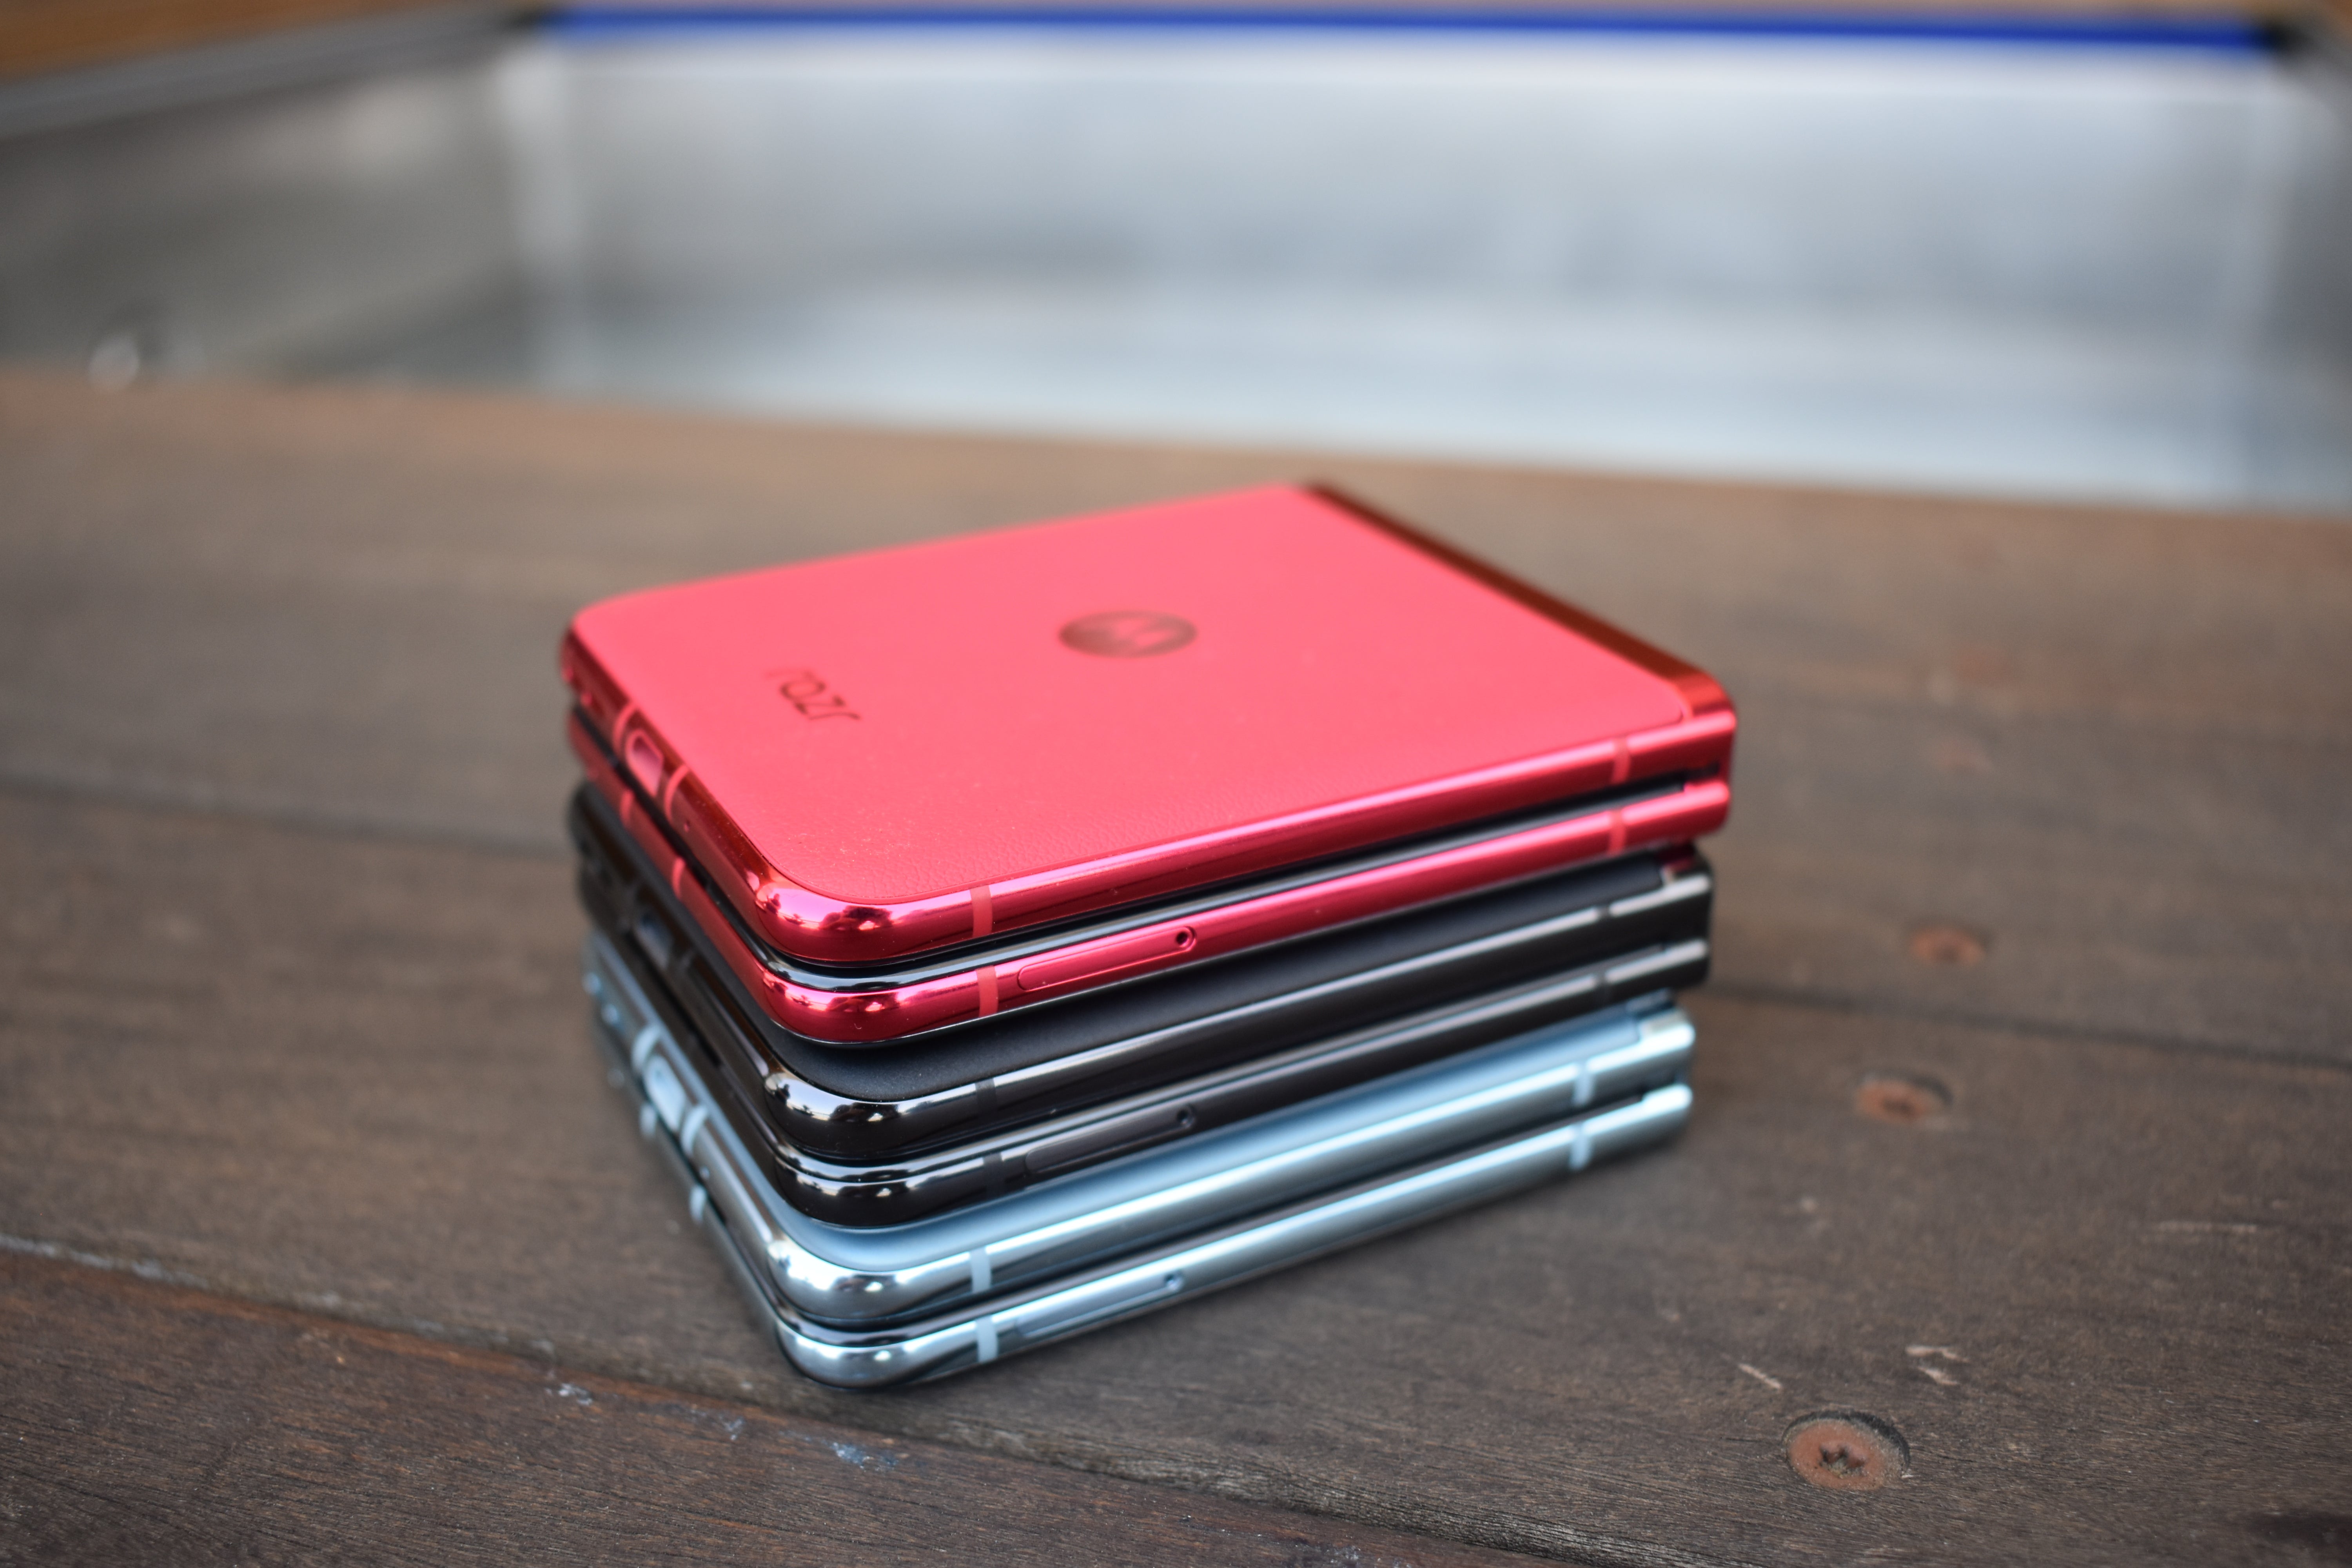 All the anticipated colours for the Razr+, including Pantone colour of the year Viva Magenta which also sports a vegan leather backplate. (Photo: Kyle Barr / Gizmodo)